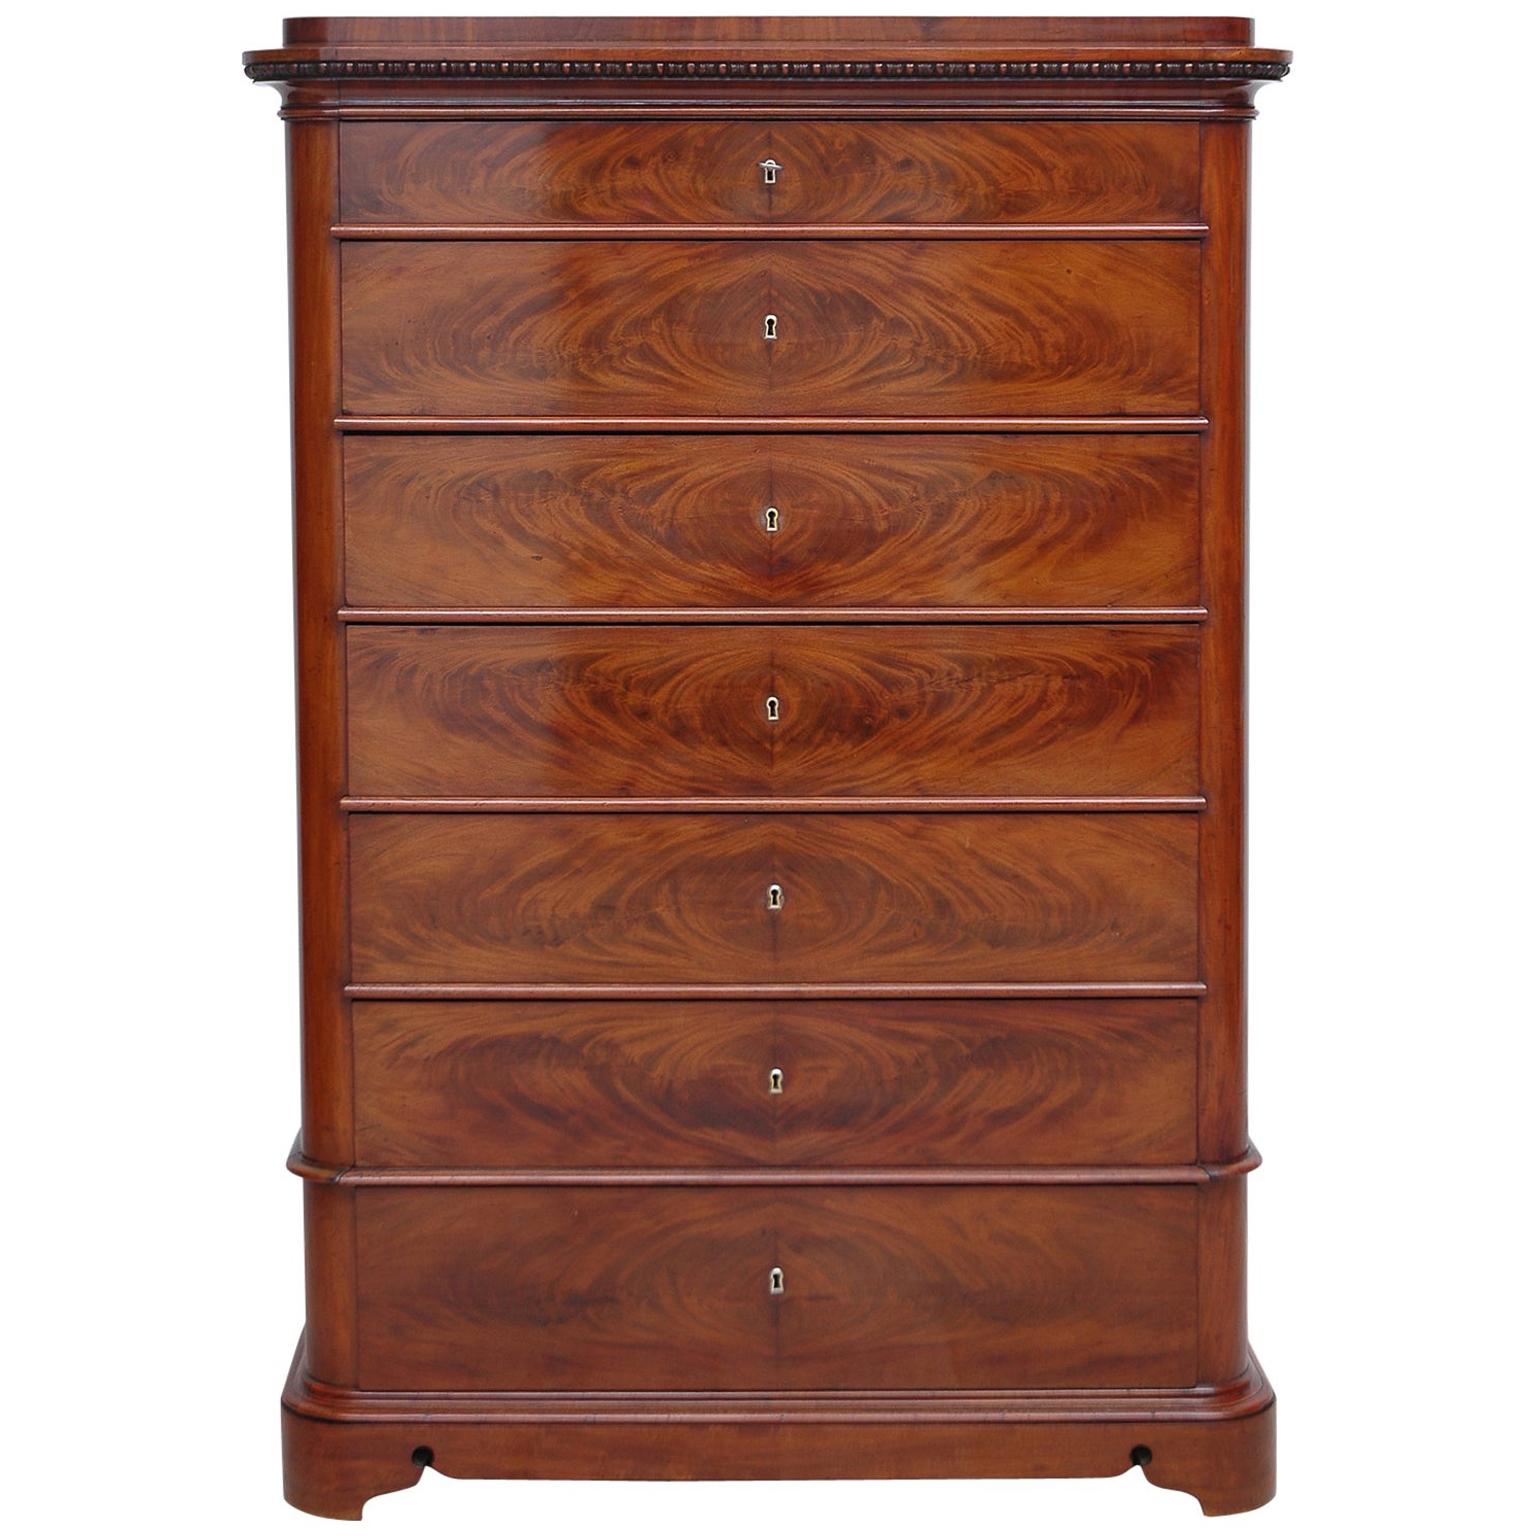 Antique Biedermeier Tall Chest of Drawers in Bookmatched Mahogany, Denmark, 1840 For Sale